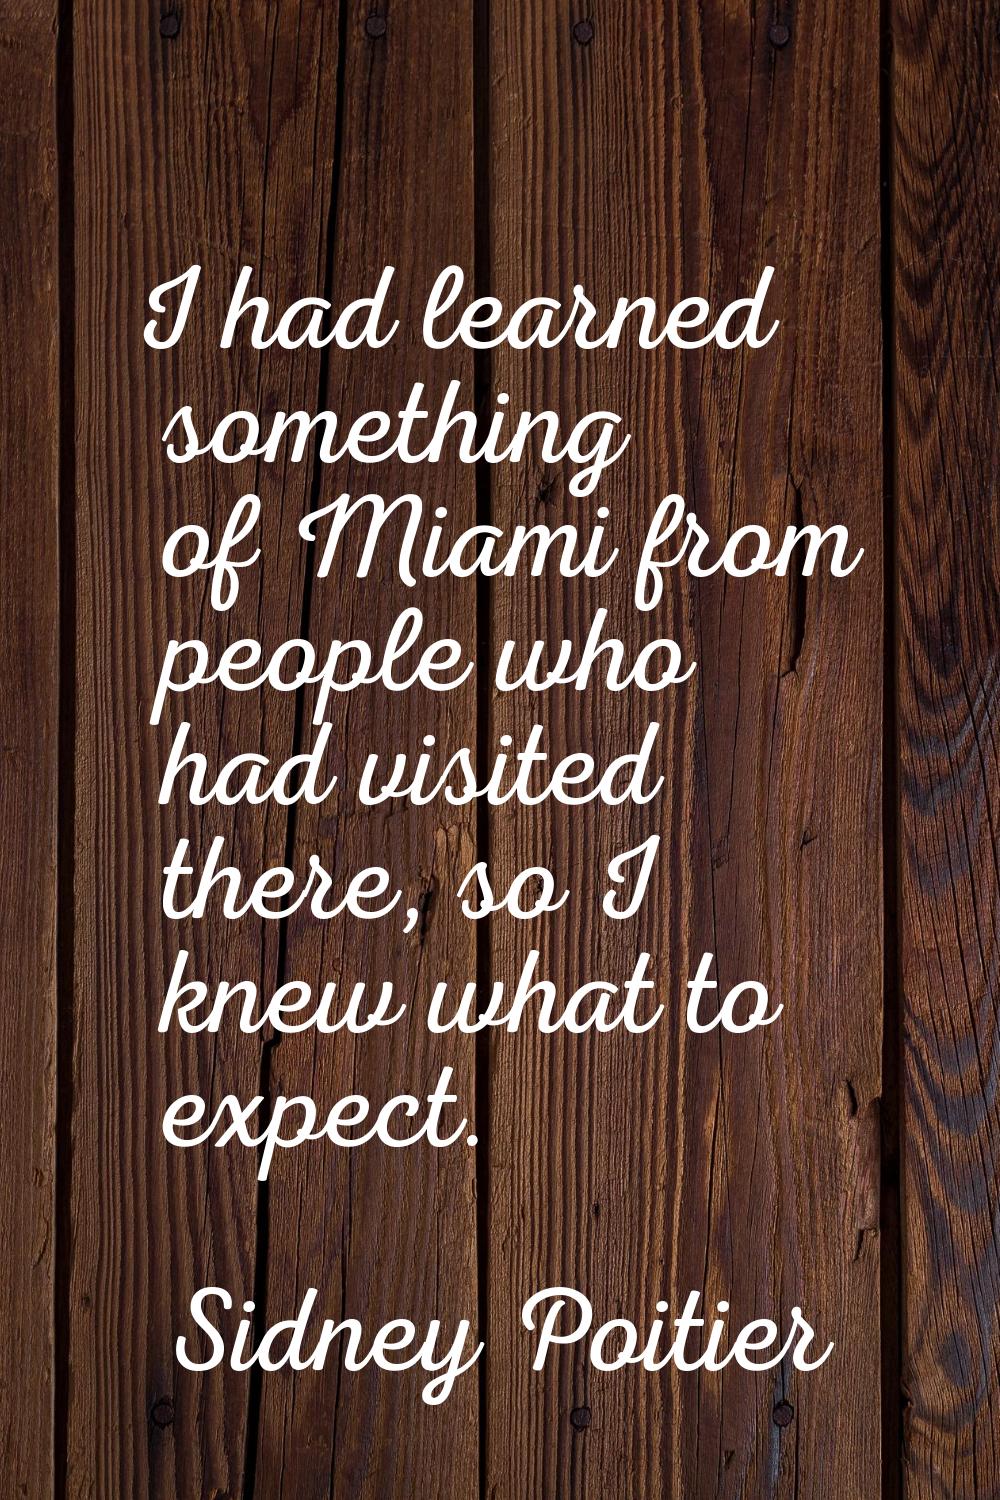 I had learned something of Miami from people who had visited there, so I knew what to expect.